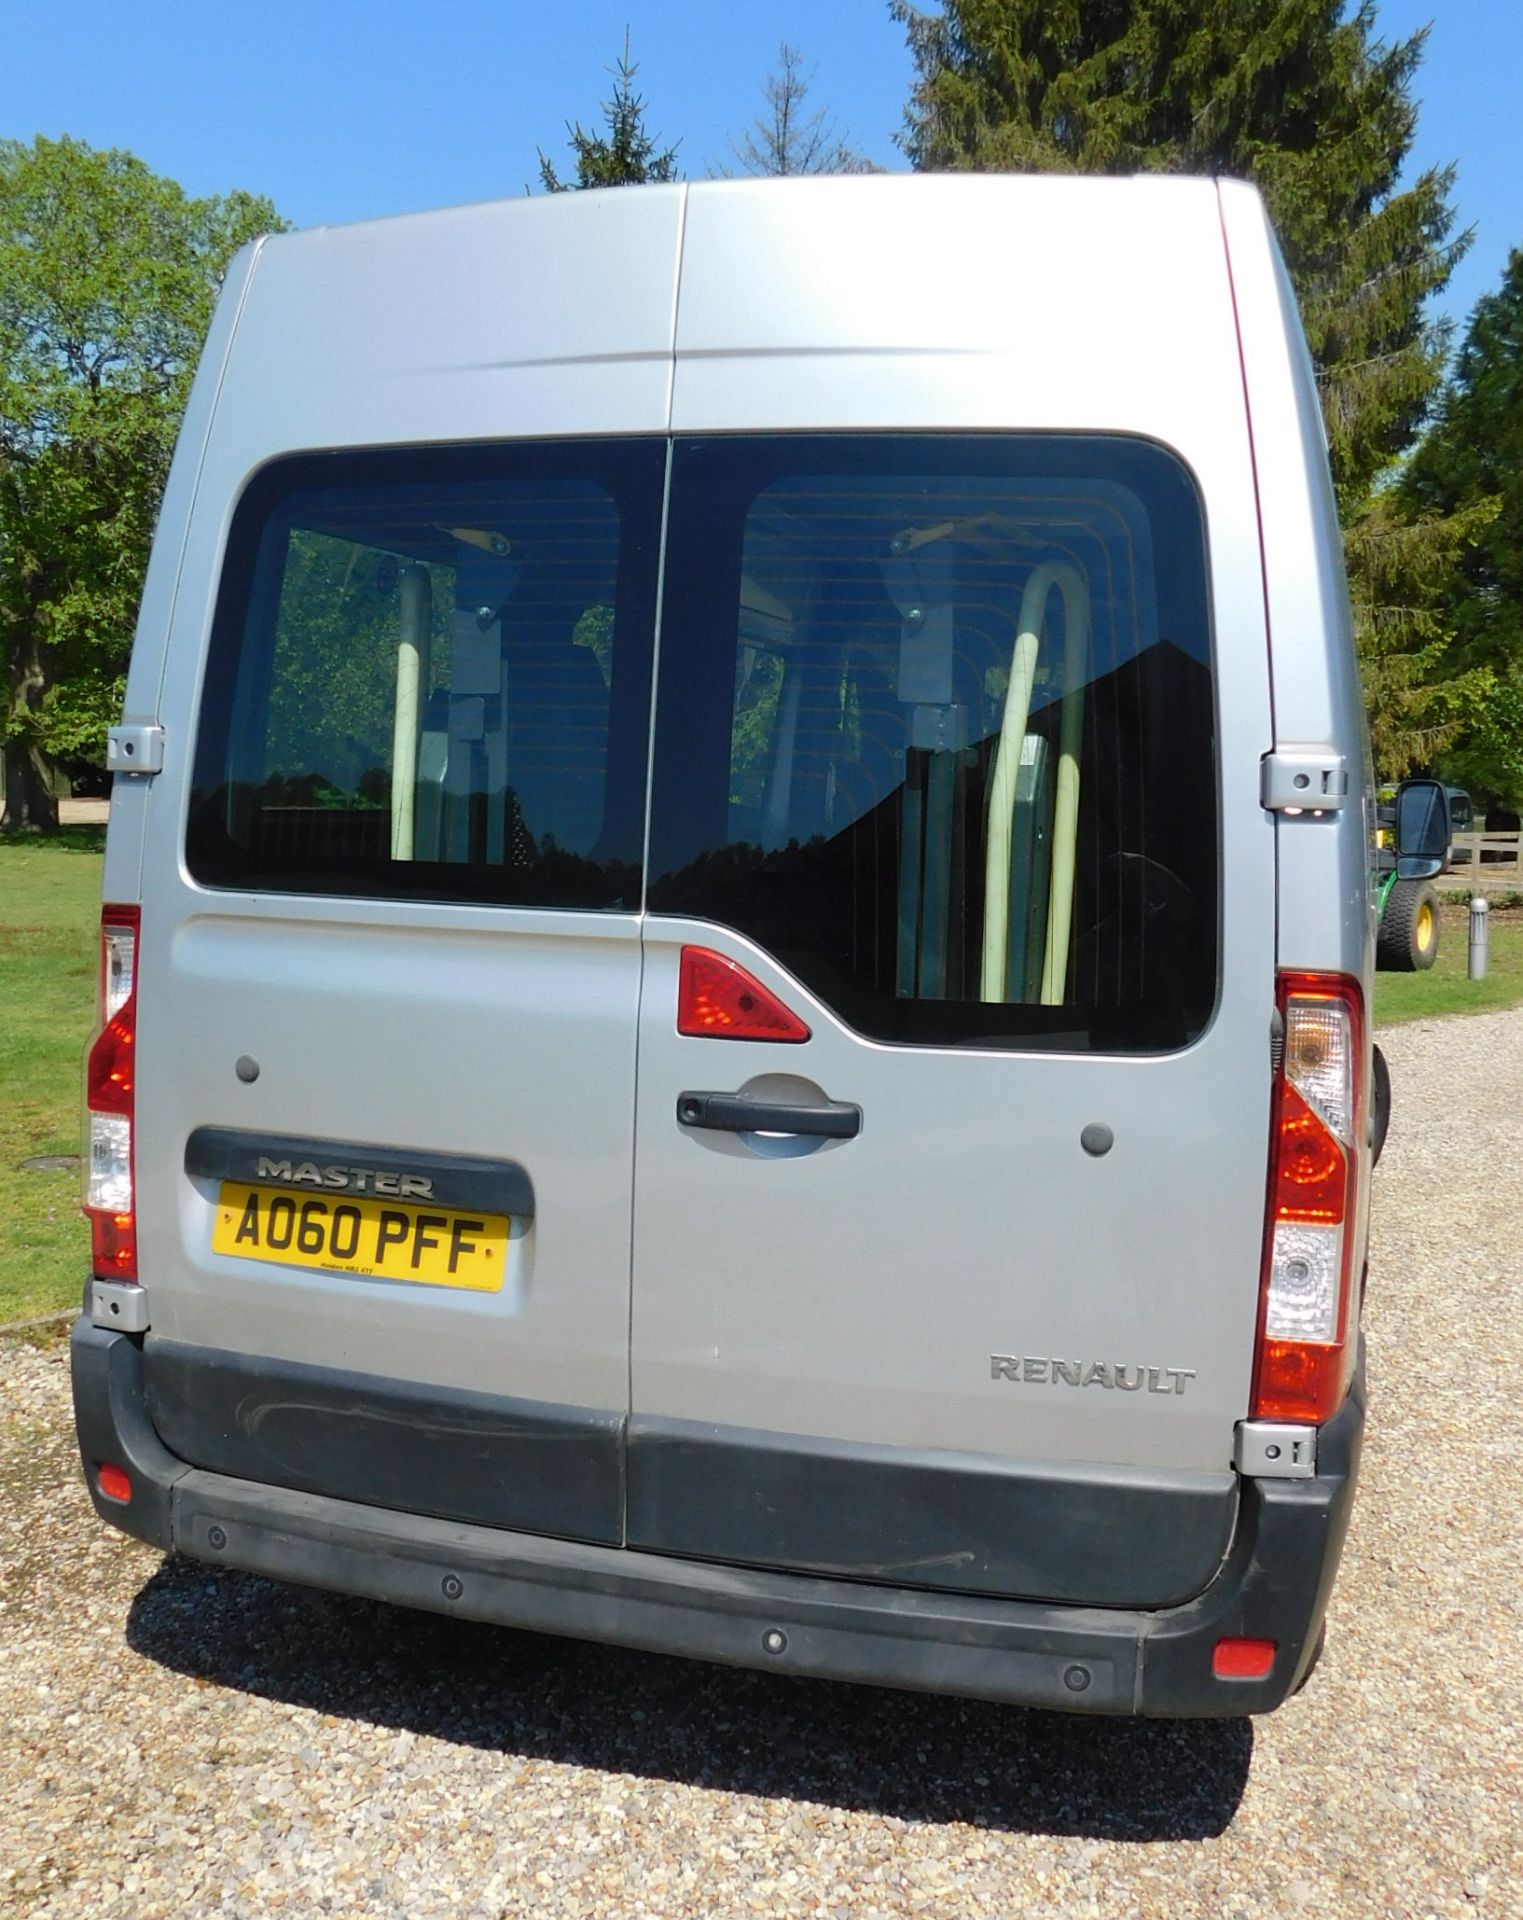 Renault Master LWB FWD LM35dCi 125 8-Seat Mini-Bus, Registration AO60 PFF, First Registered 30th - Image 7 of 23